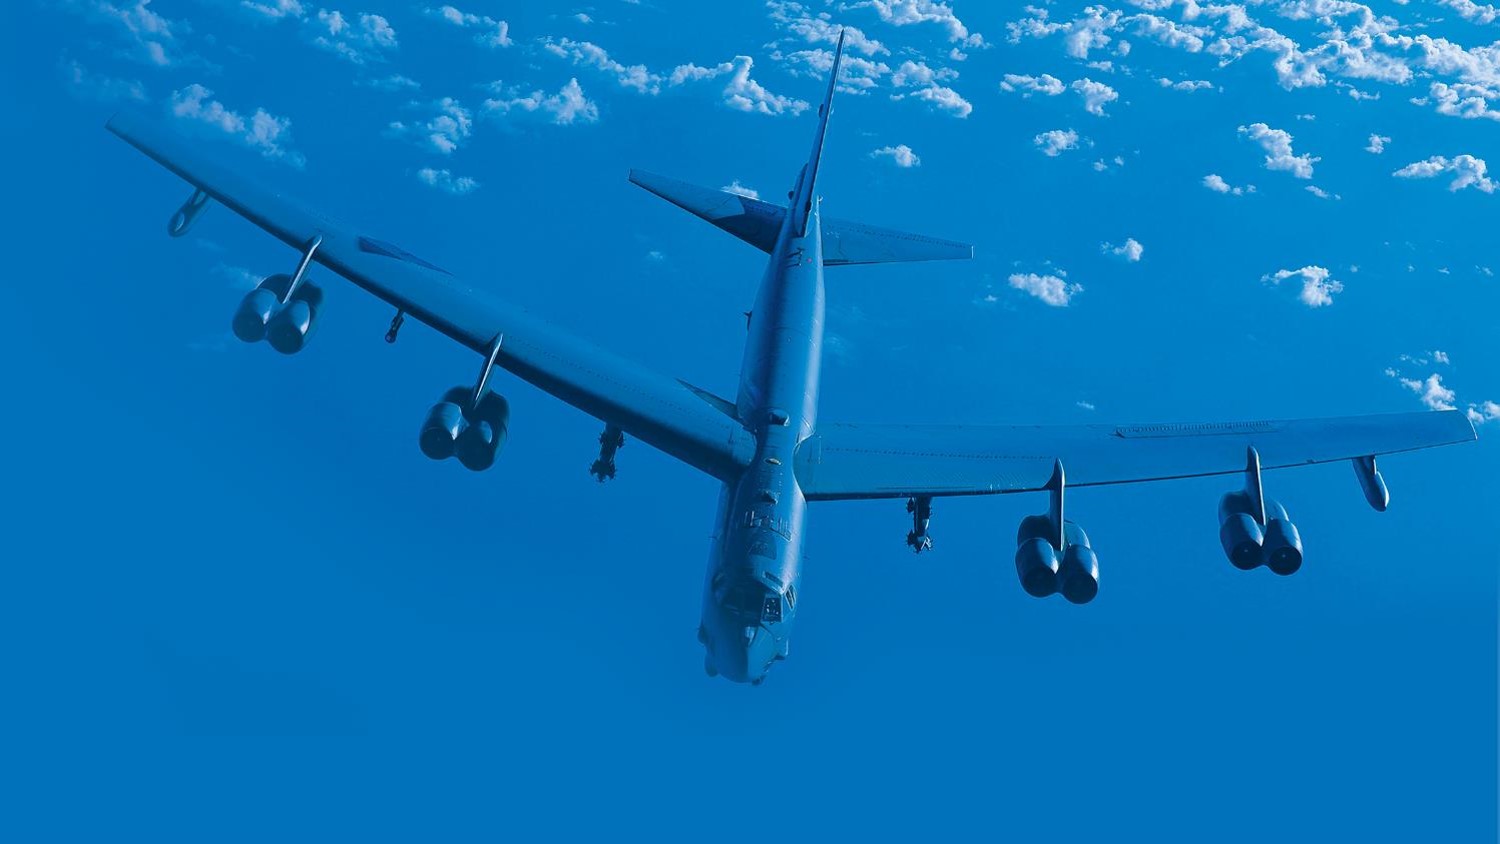 B-52 Re-Engining to Get New Program Baseline in the Fall, with ‘Some’ Cost Increase